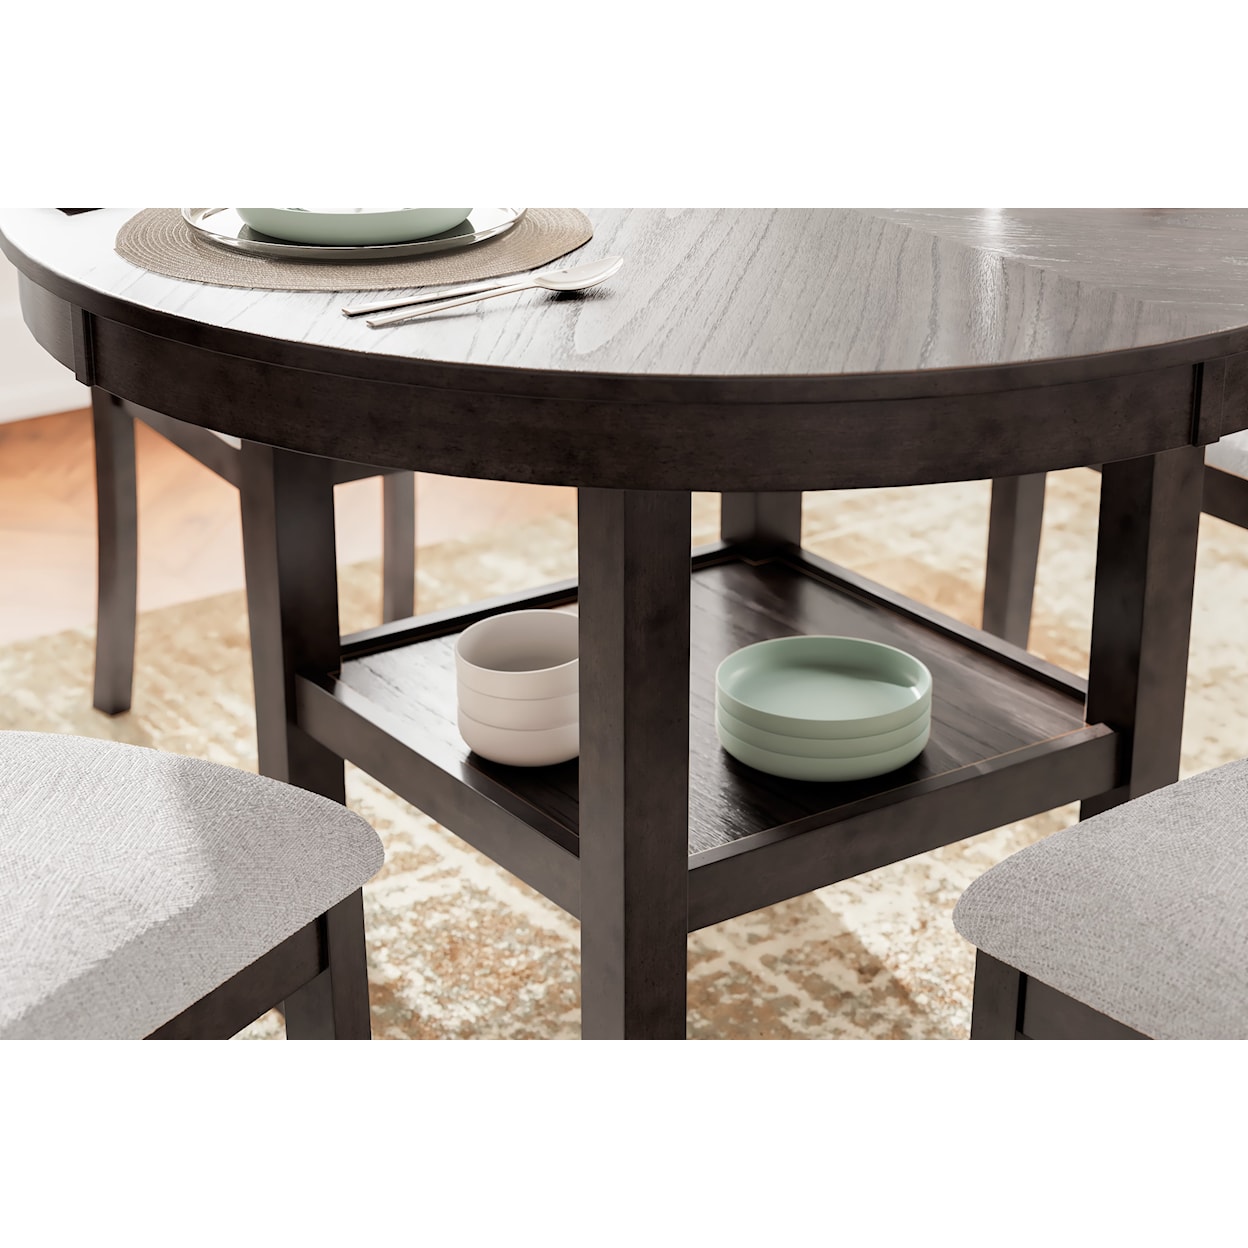 Signature Design by Ashley Furniture Langwest Dining Room Table Set